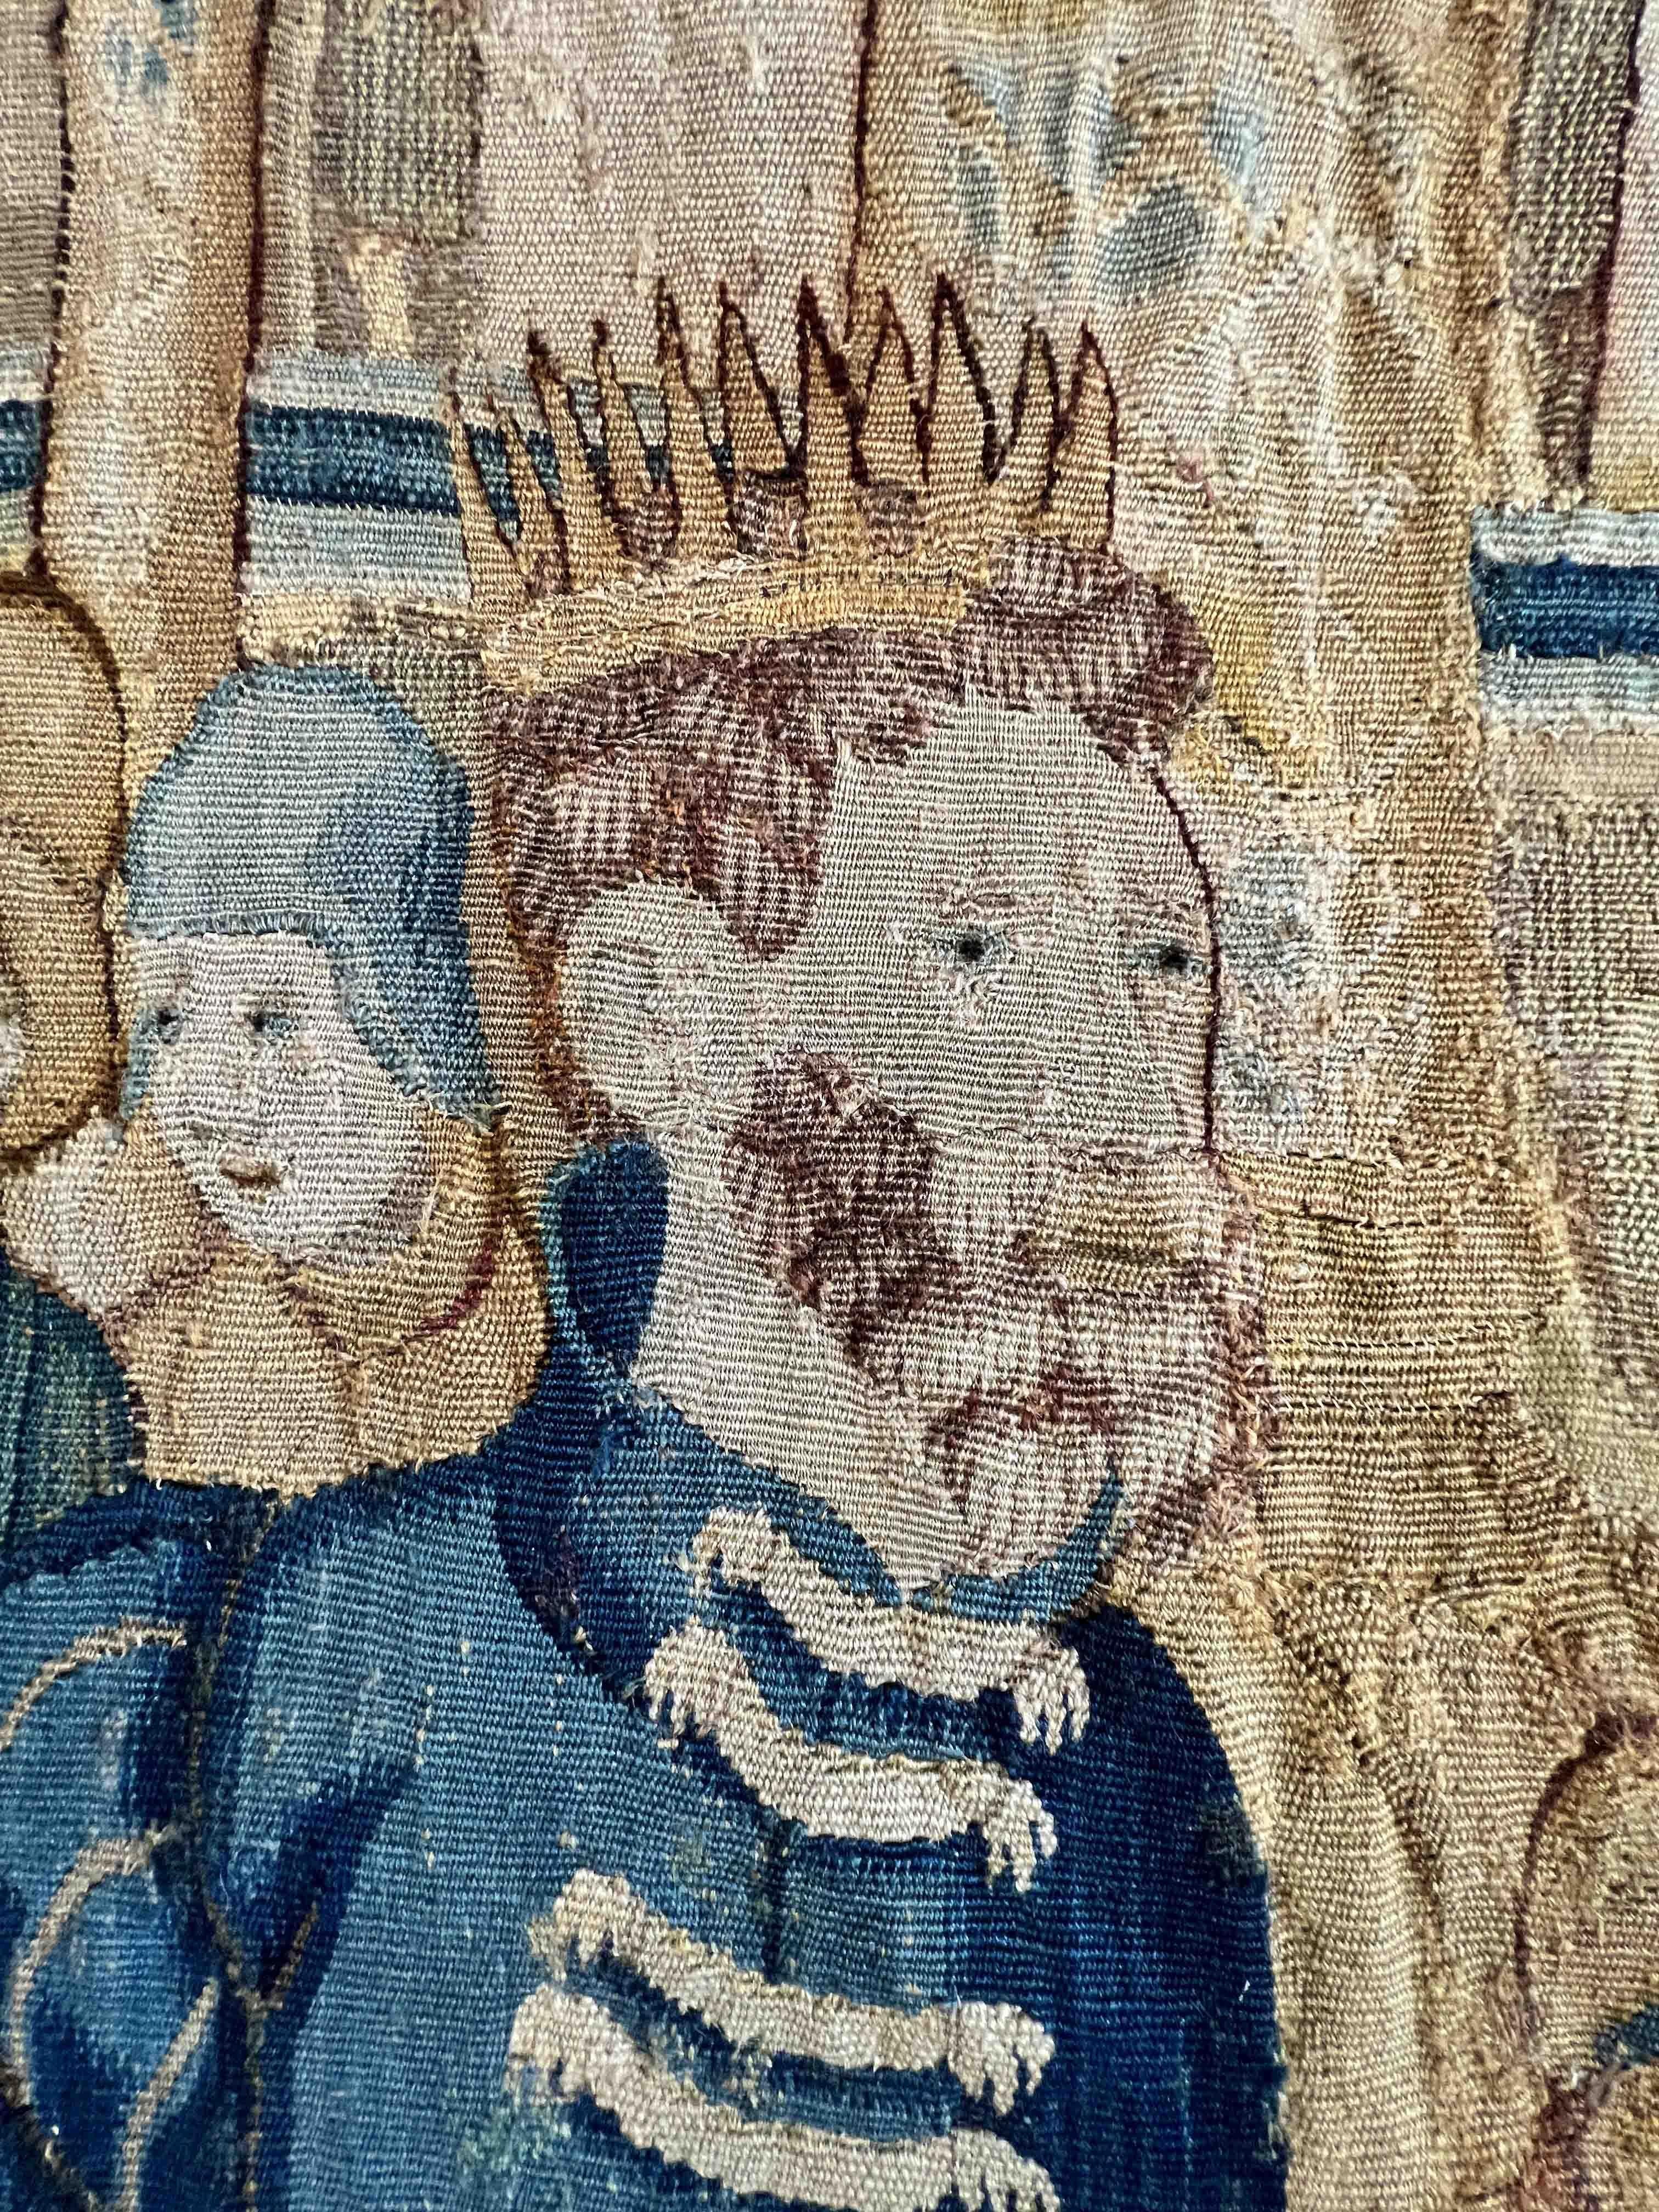 French Sublime Flanders Tapestry - end of 16th century - N° 891 For Sale